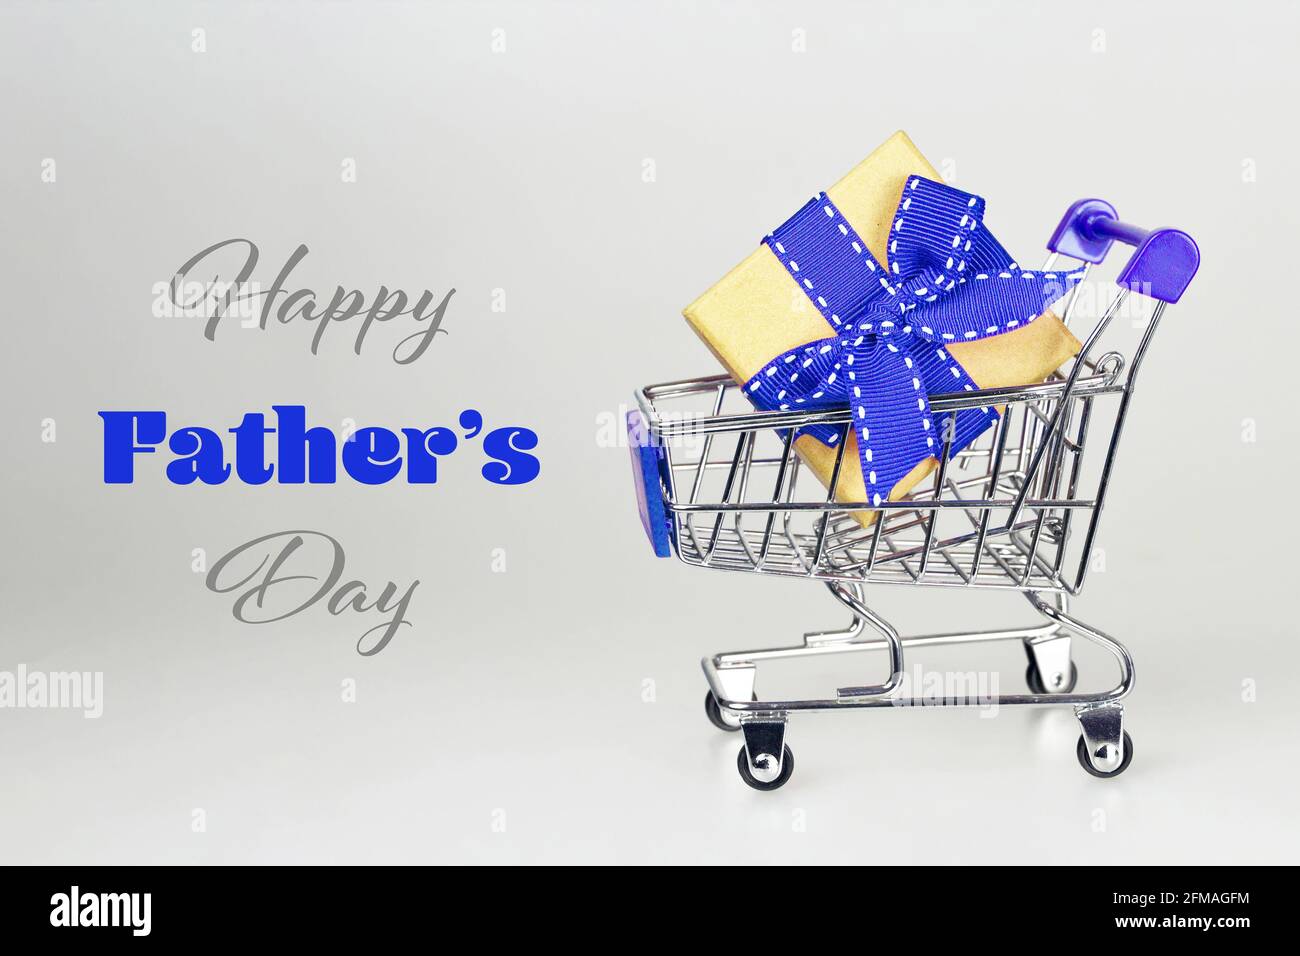 Fathers Day gift in shopping cart. Happy Fathers Day card Stock Photo